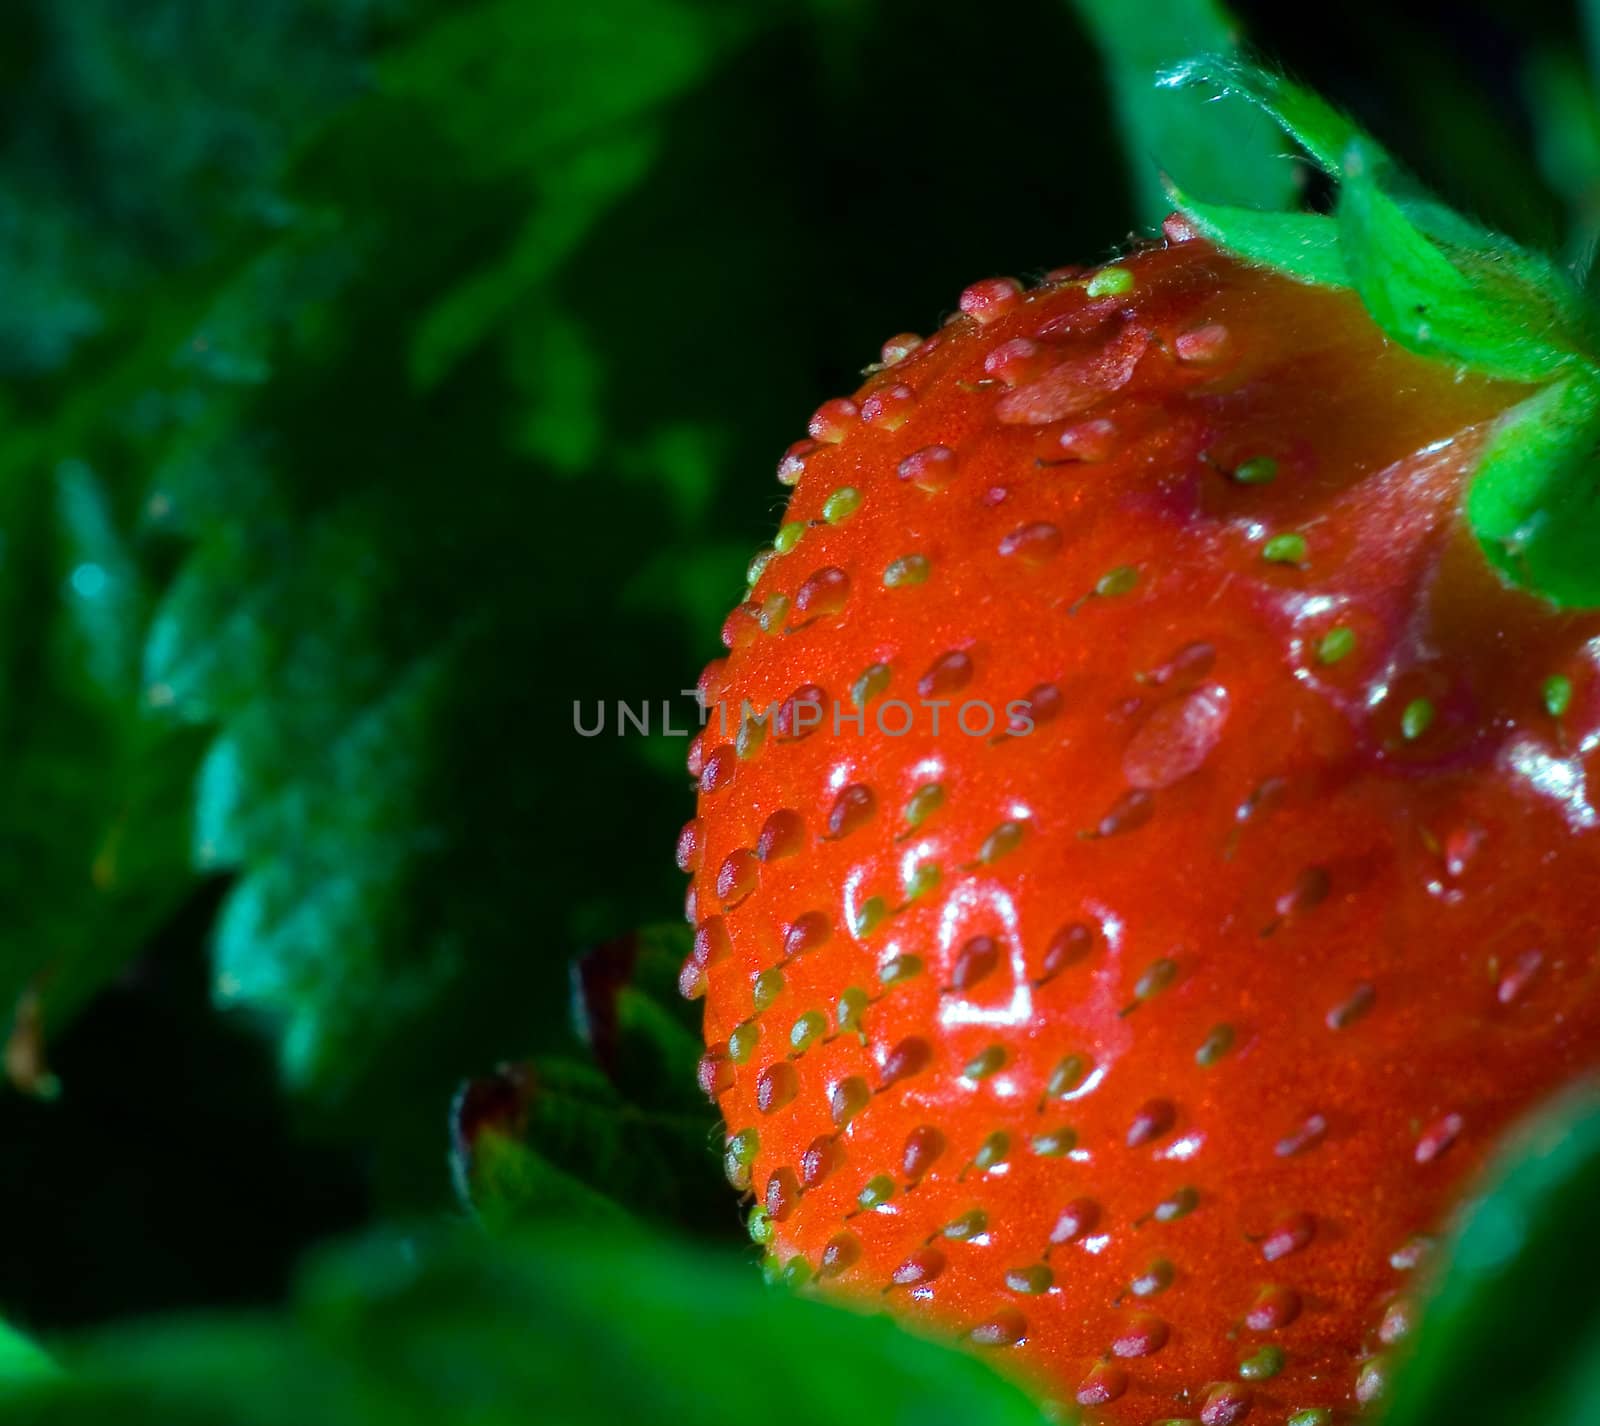 Thrickets of a strawberry.  photo with a bright red berry